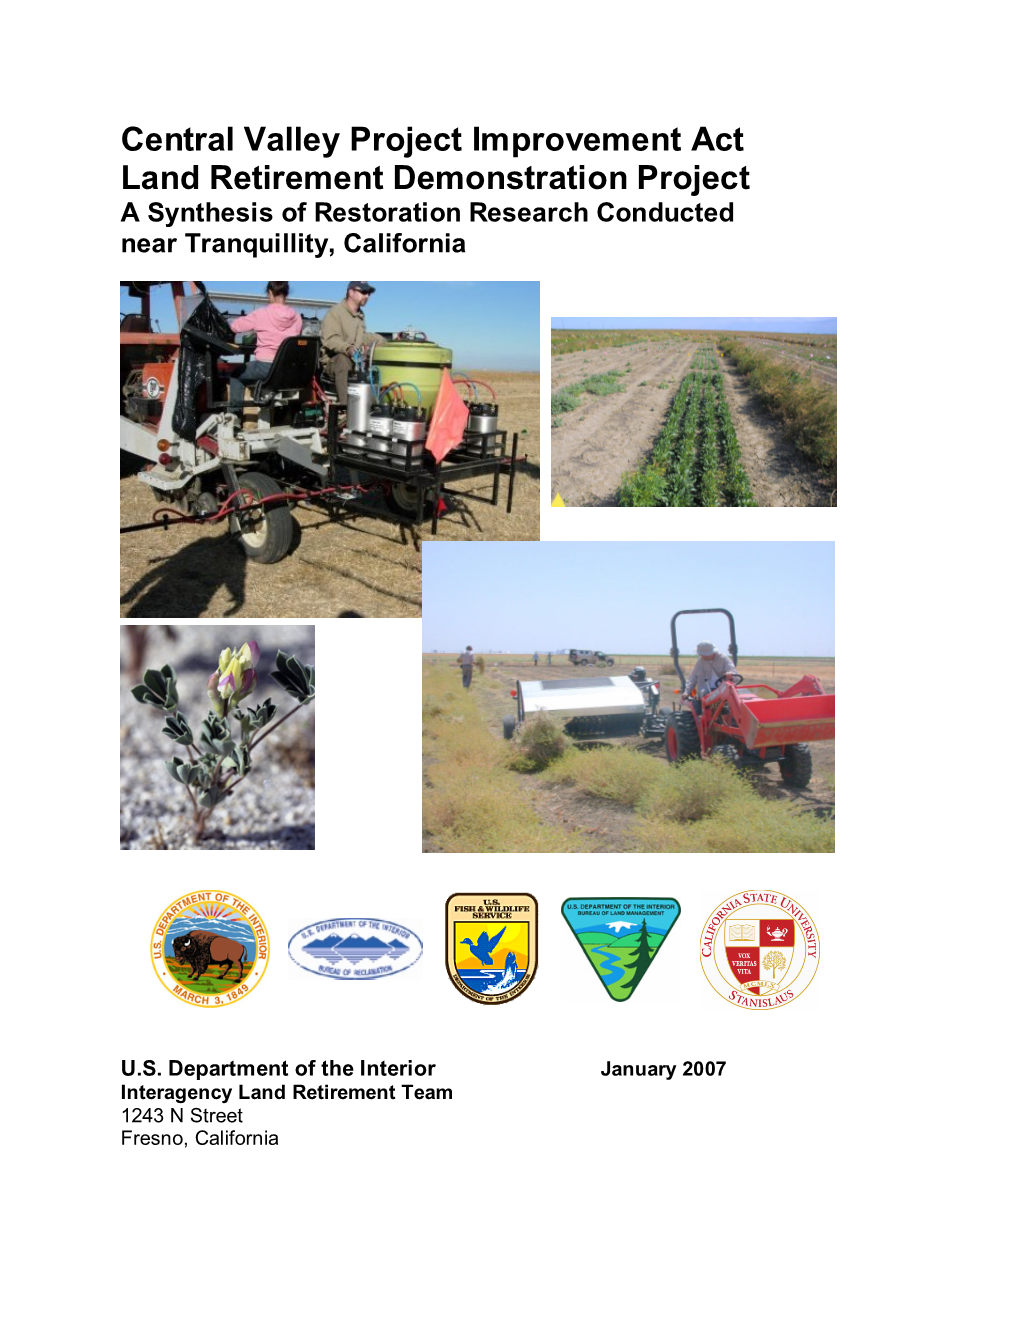 Central Valley Project Improvement Act Land Retirement Demonstration Project a Synthesis of Restoration Research Conducted Near Tranquillity, California